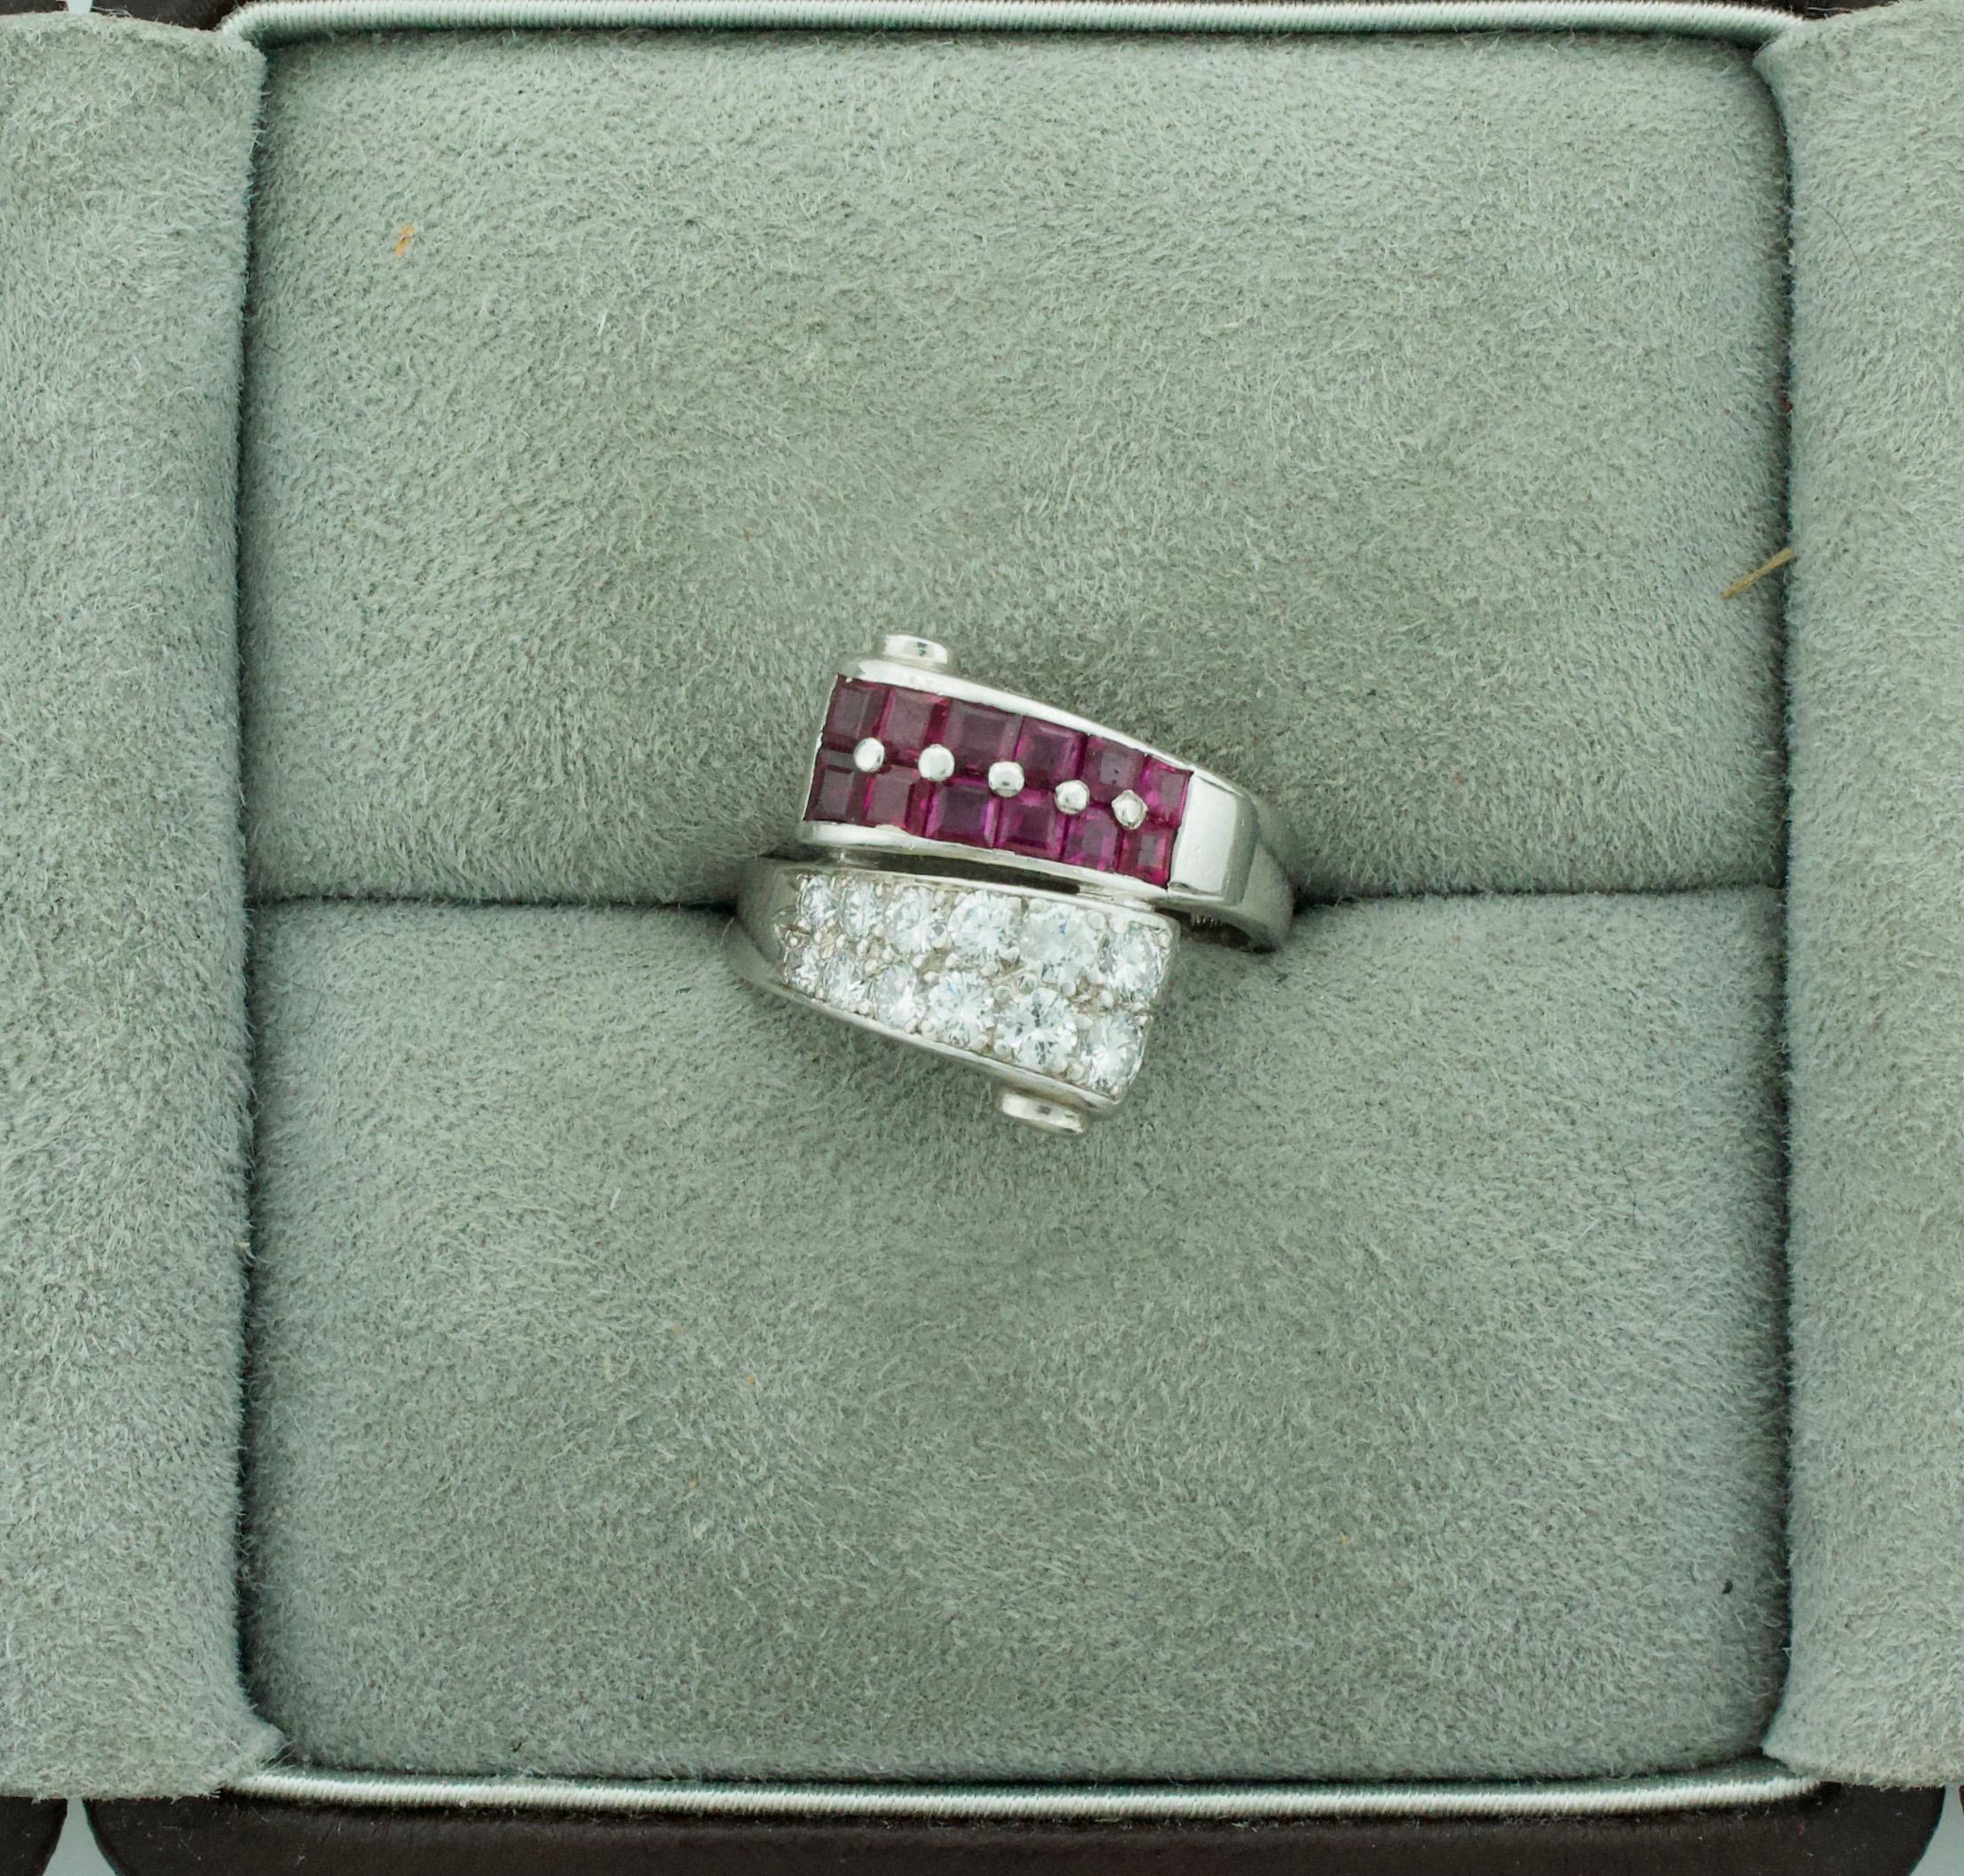 Extreme Art Deco and Diamond Ring Circa 1930's
Twelve Square Cut Rubies Weighing 1.00 Carats Approximately [bright with no imperfections visible to the naked eye]
Twelve Round Brilliant Cut Diamonds Weighing .45 Carats Approximately 
Currently Size